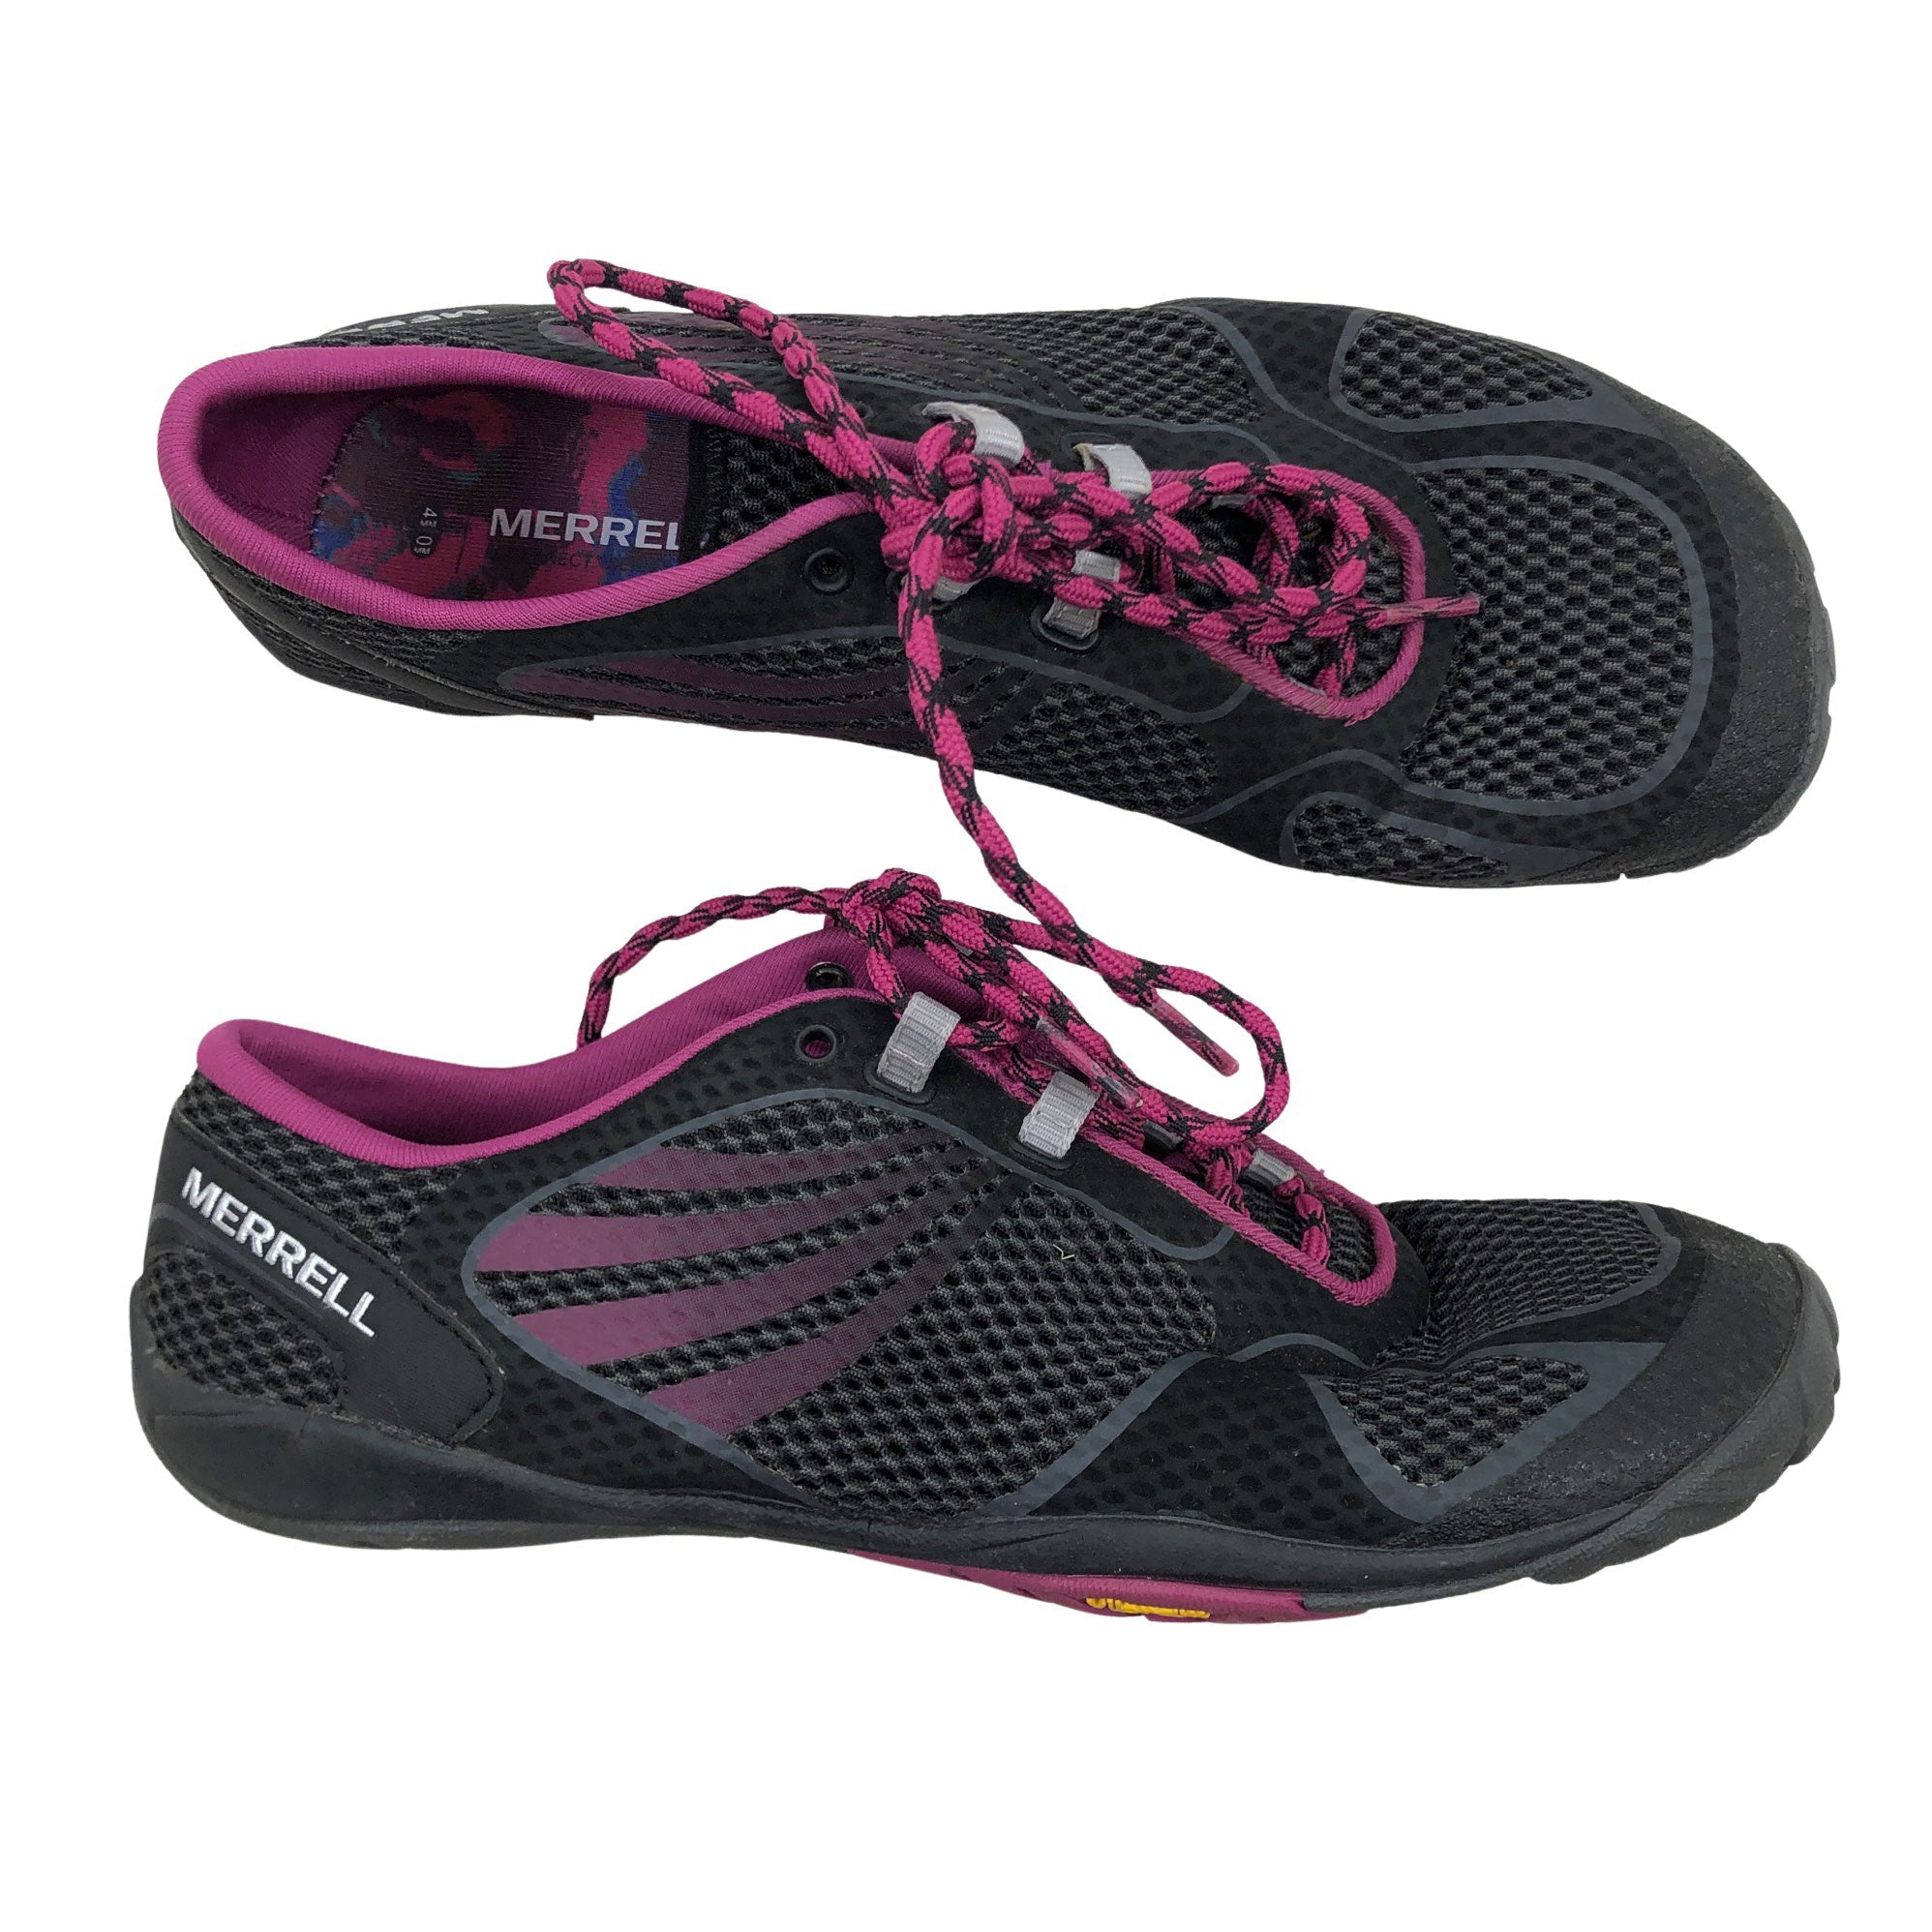 Merrell Running shoes, size 39 (Black) Emmy